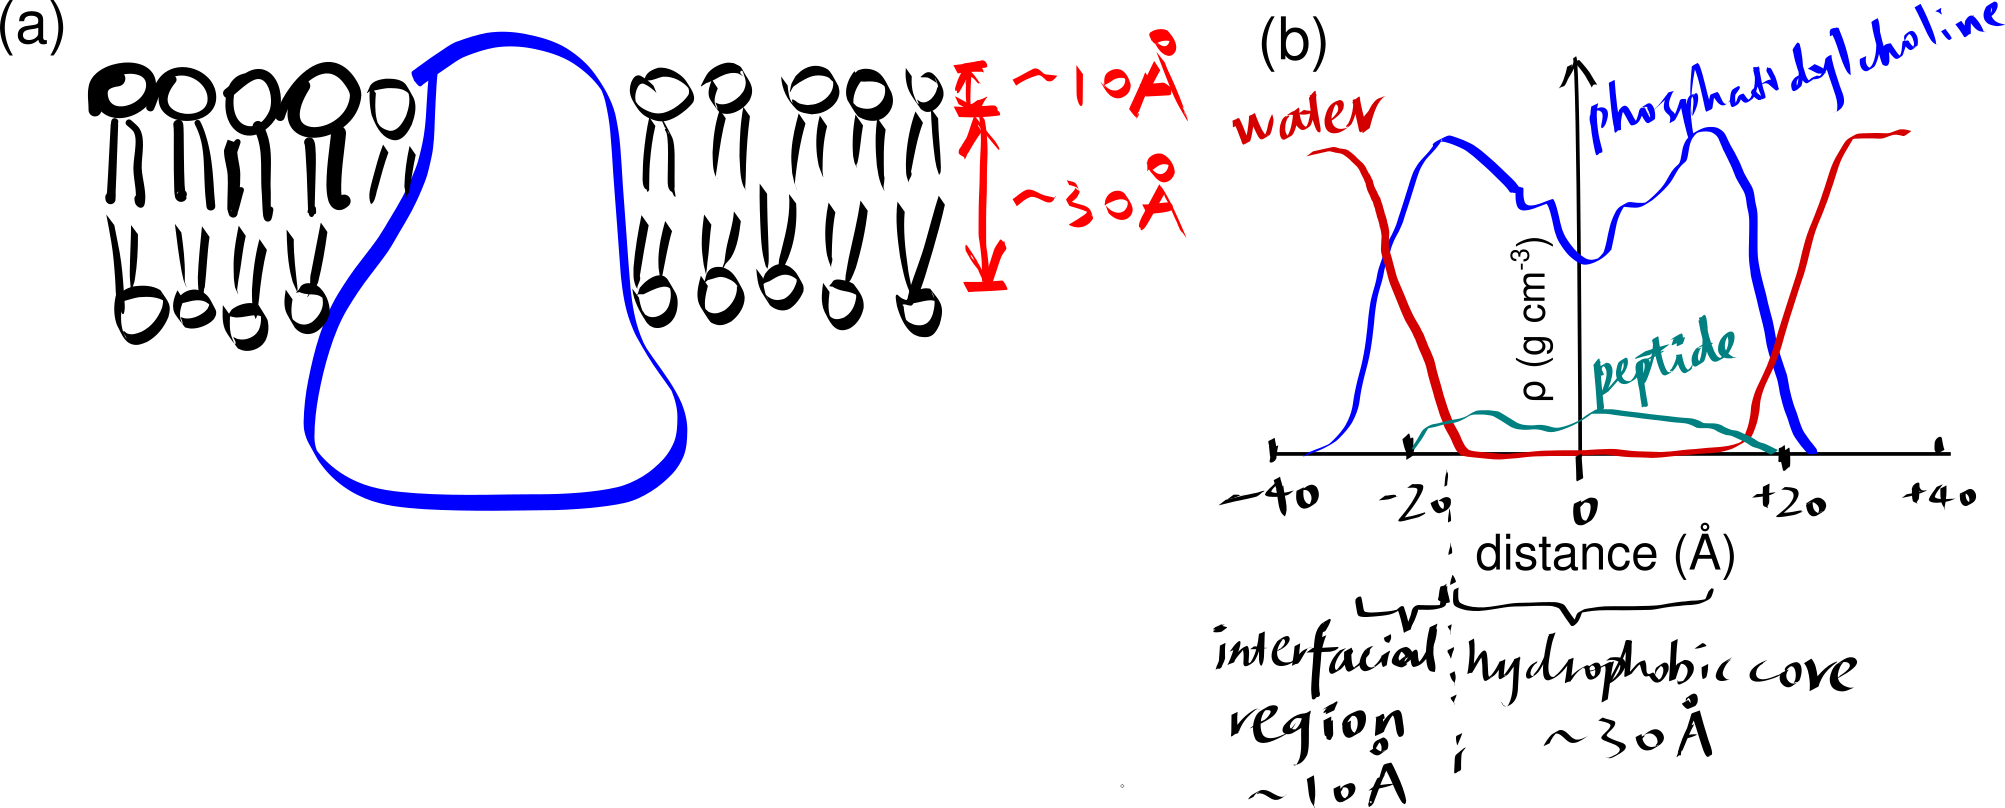 (a) a schematic showing a integral protein embedded within a biomembrane. (b)